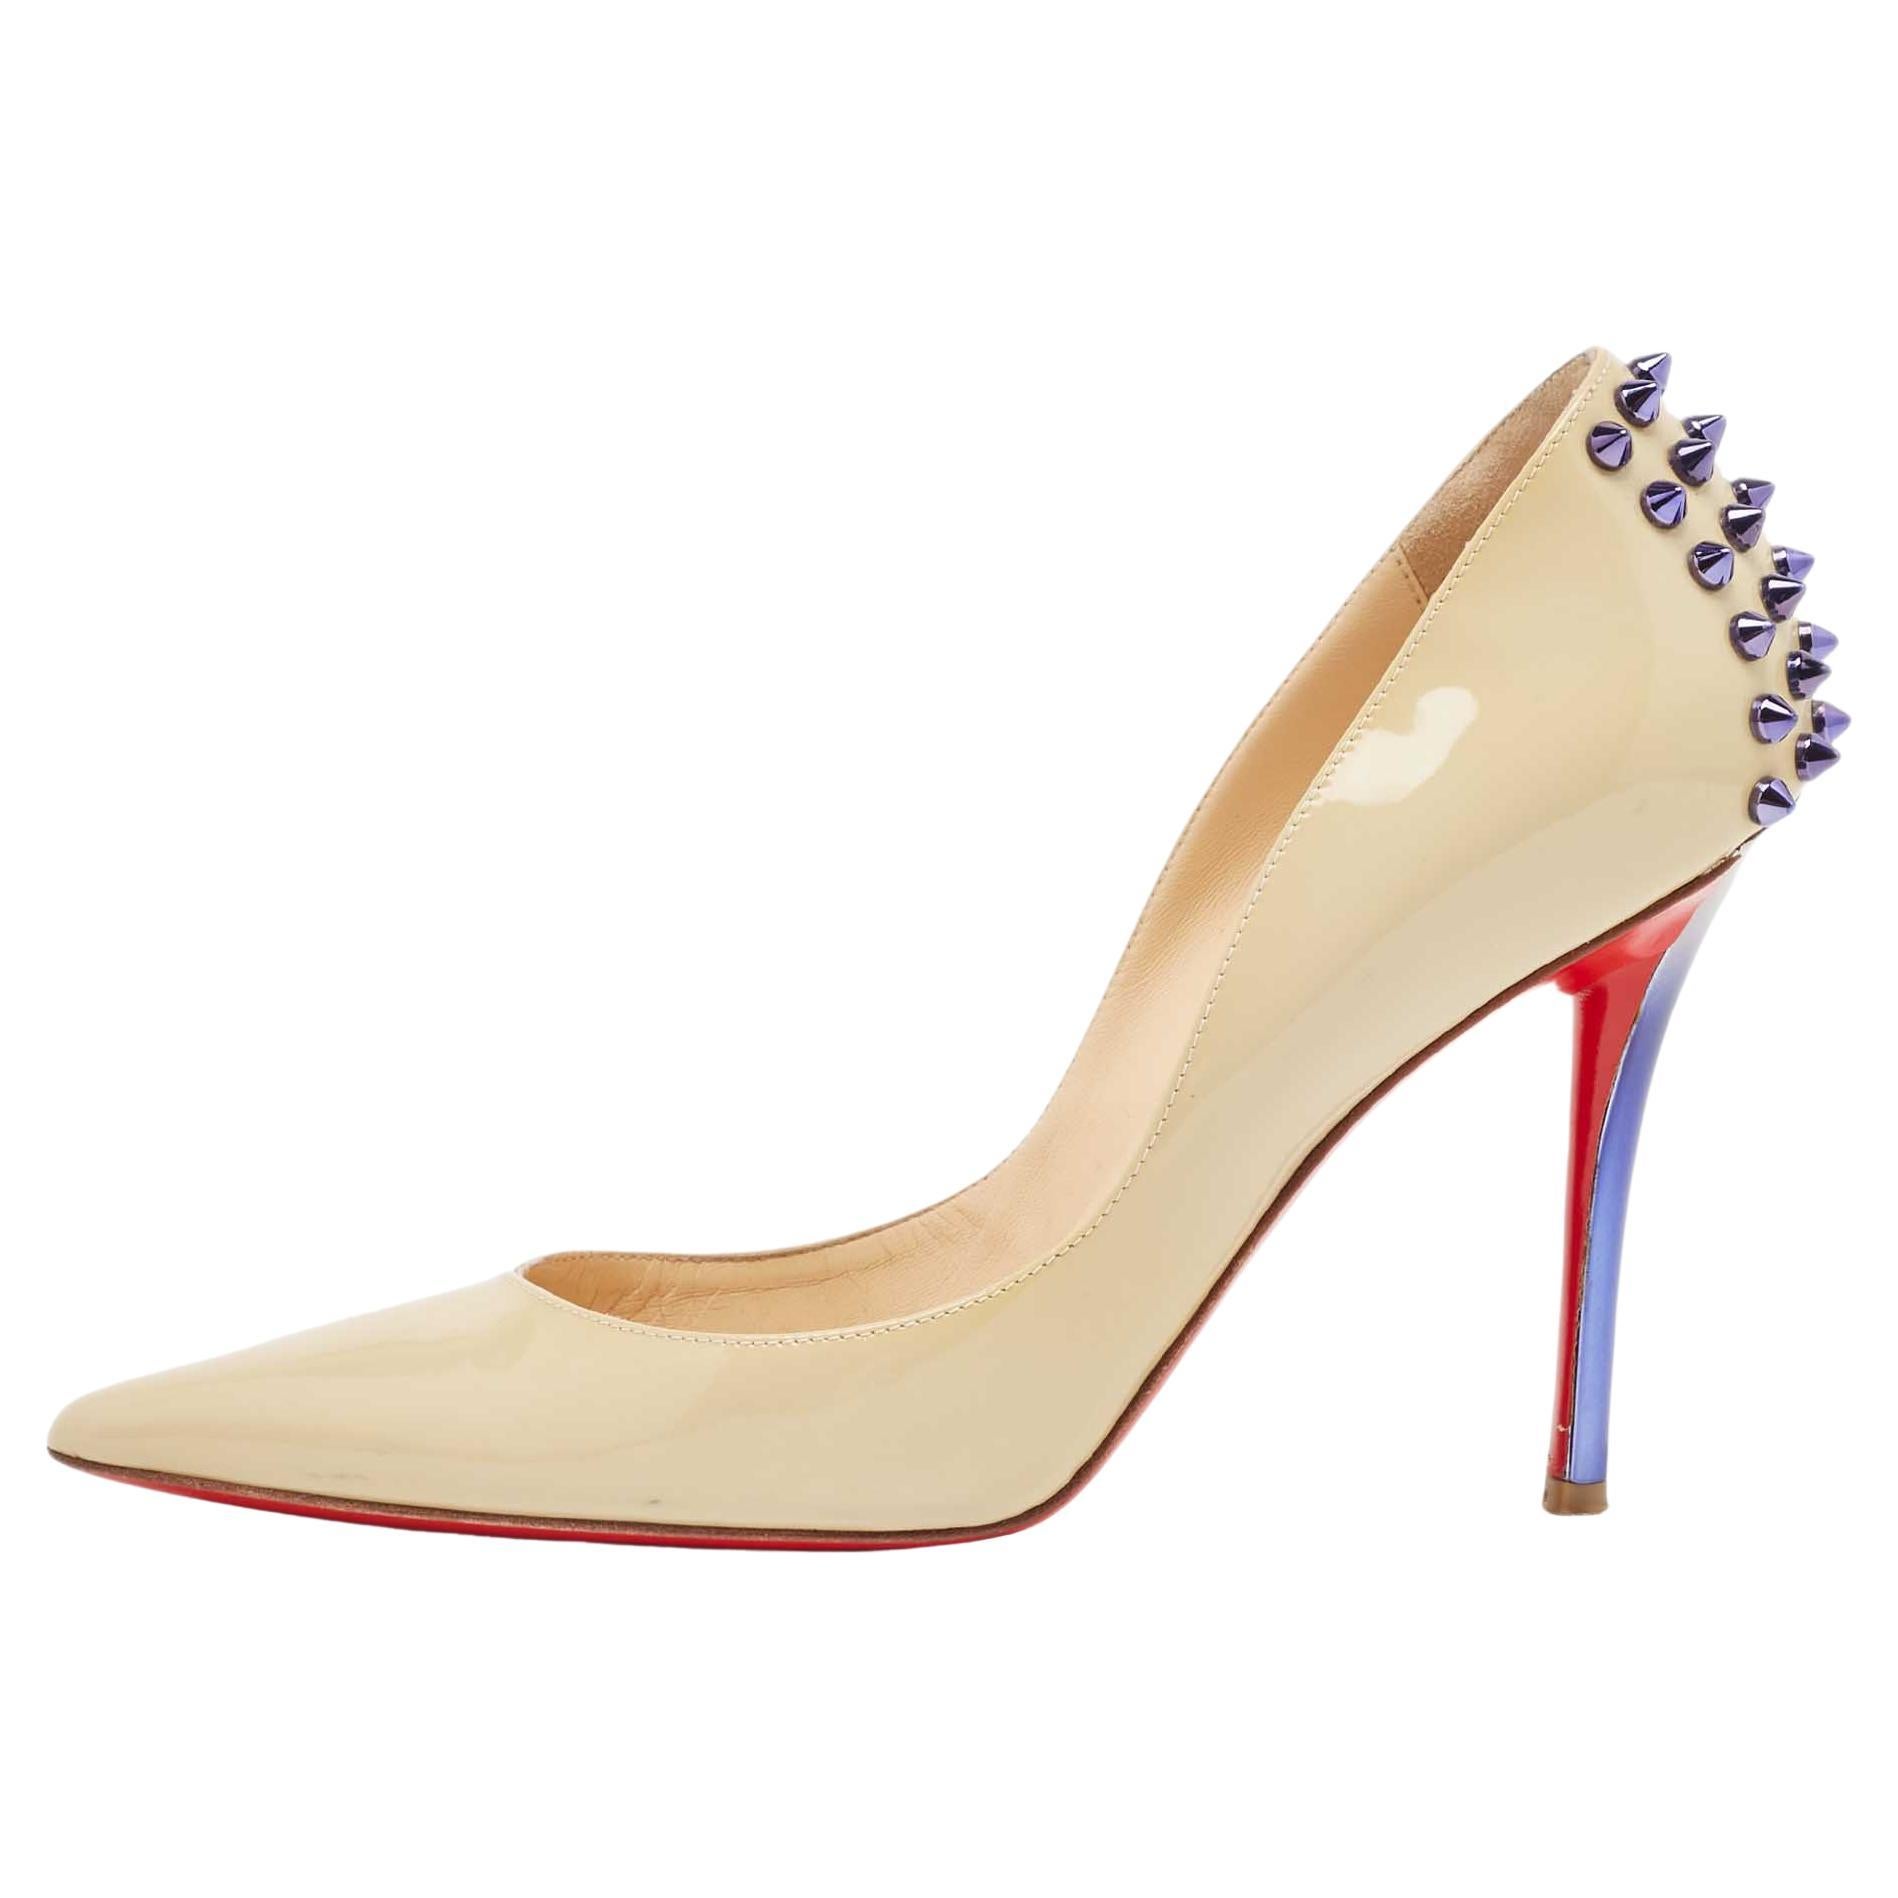 Christian Louboutin Beige Patent Leather Spiked Pumps Size 37 For Sale